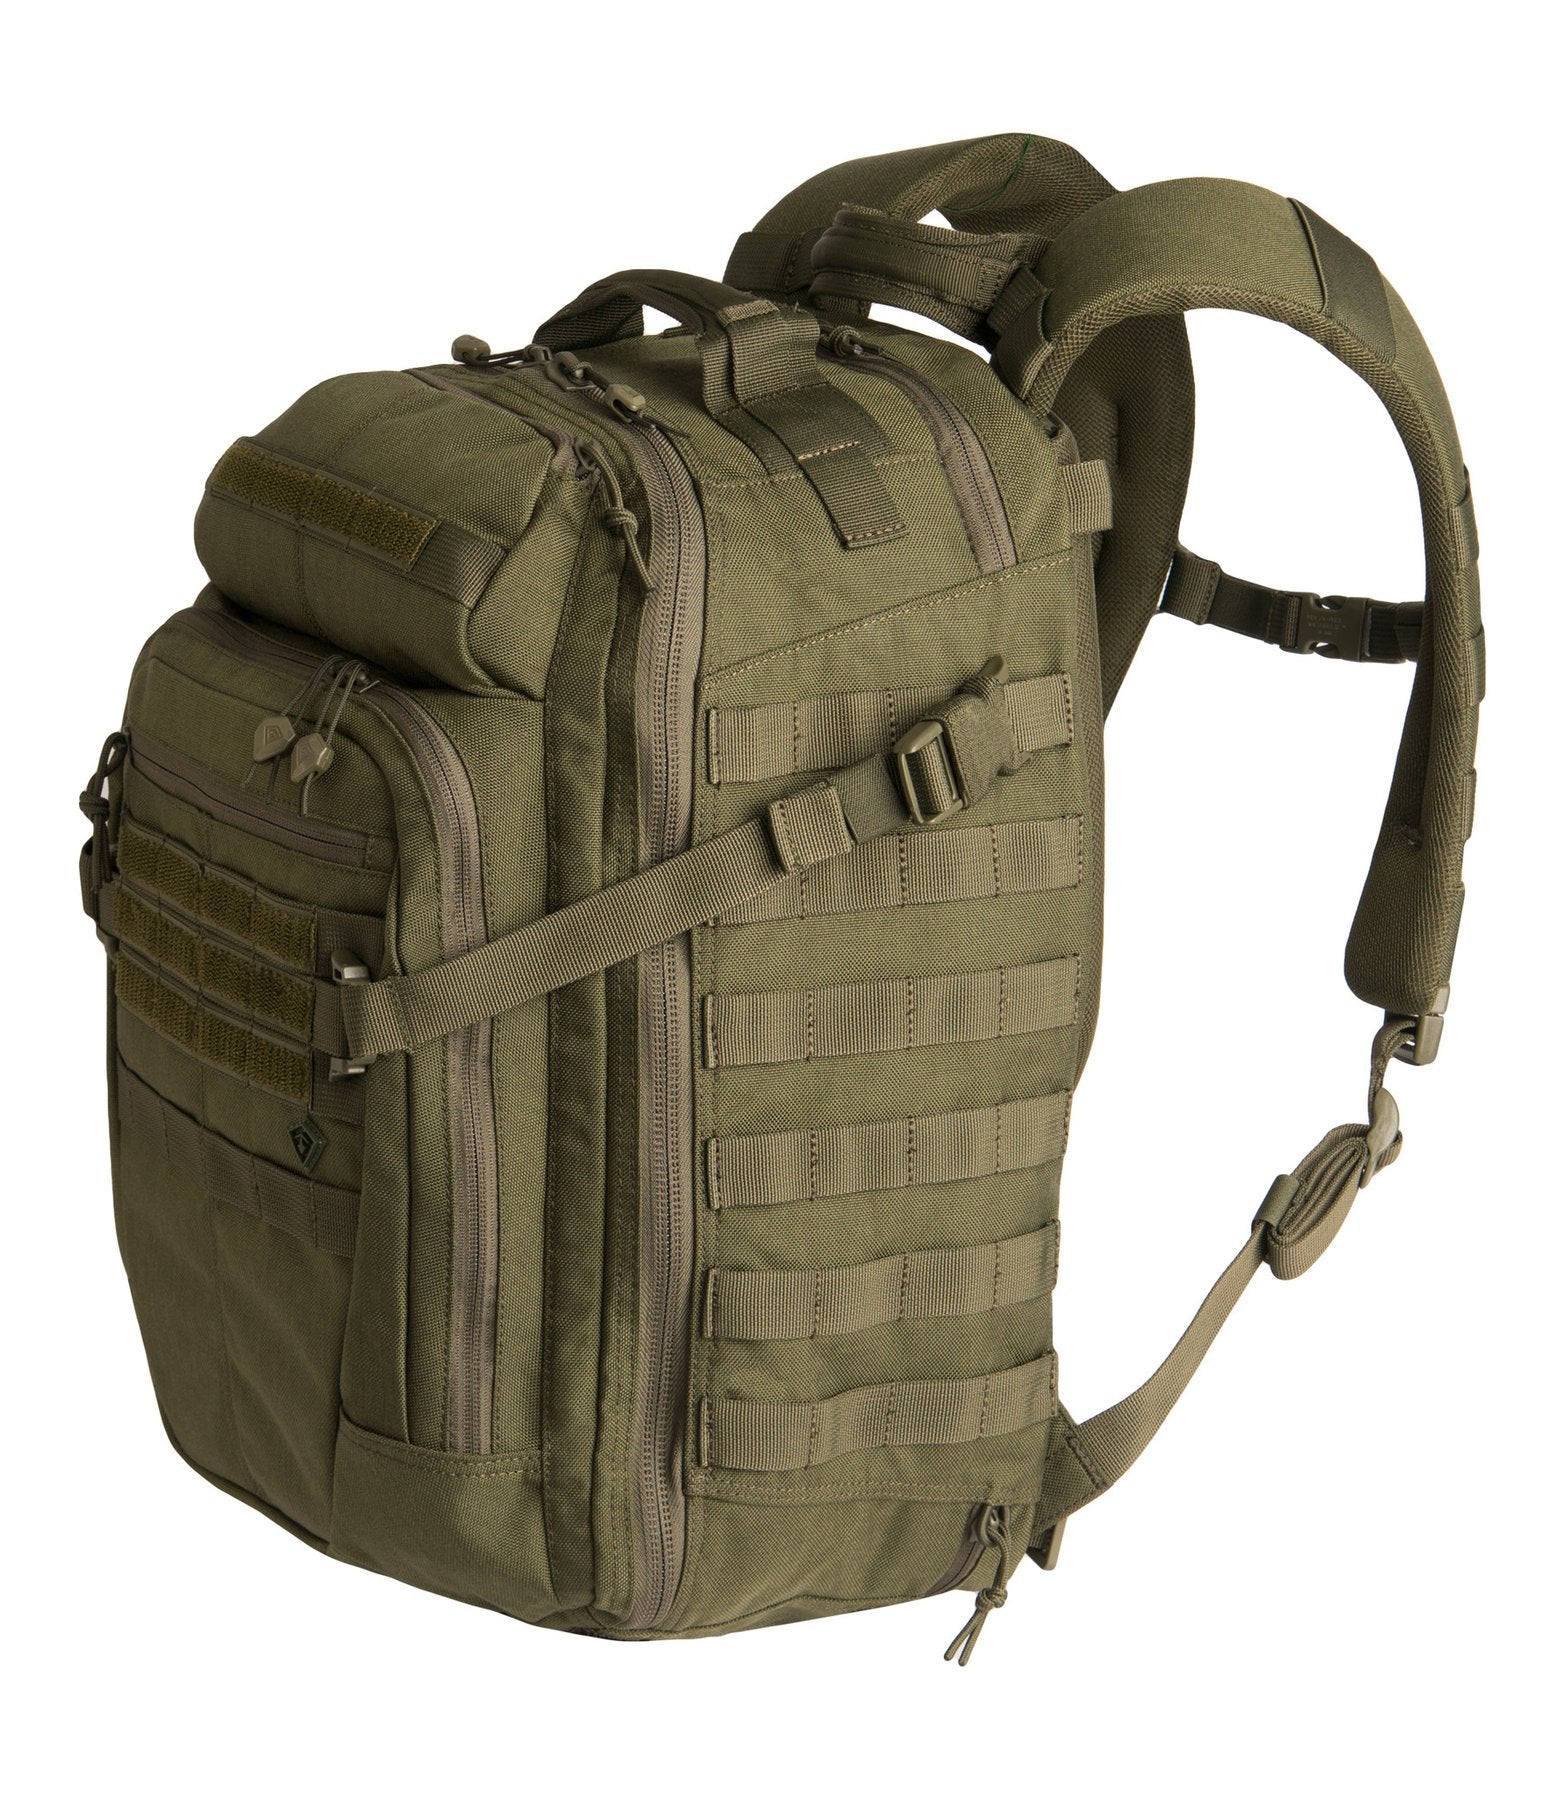 Specialist 1-Day Backpack 36L (180005) Black, Coyote, OD Green